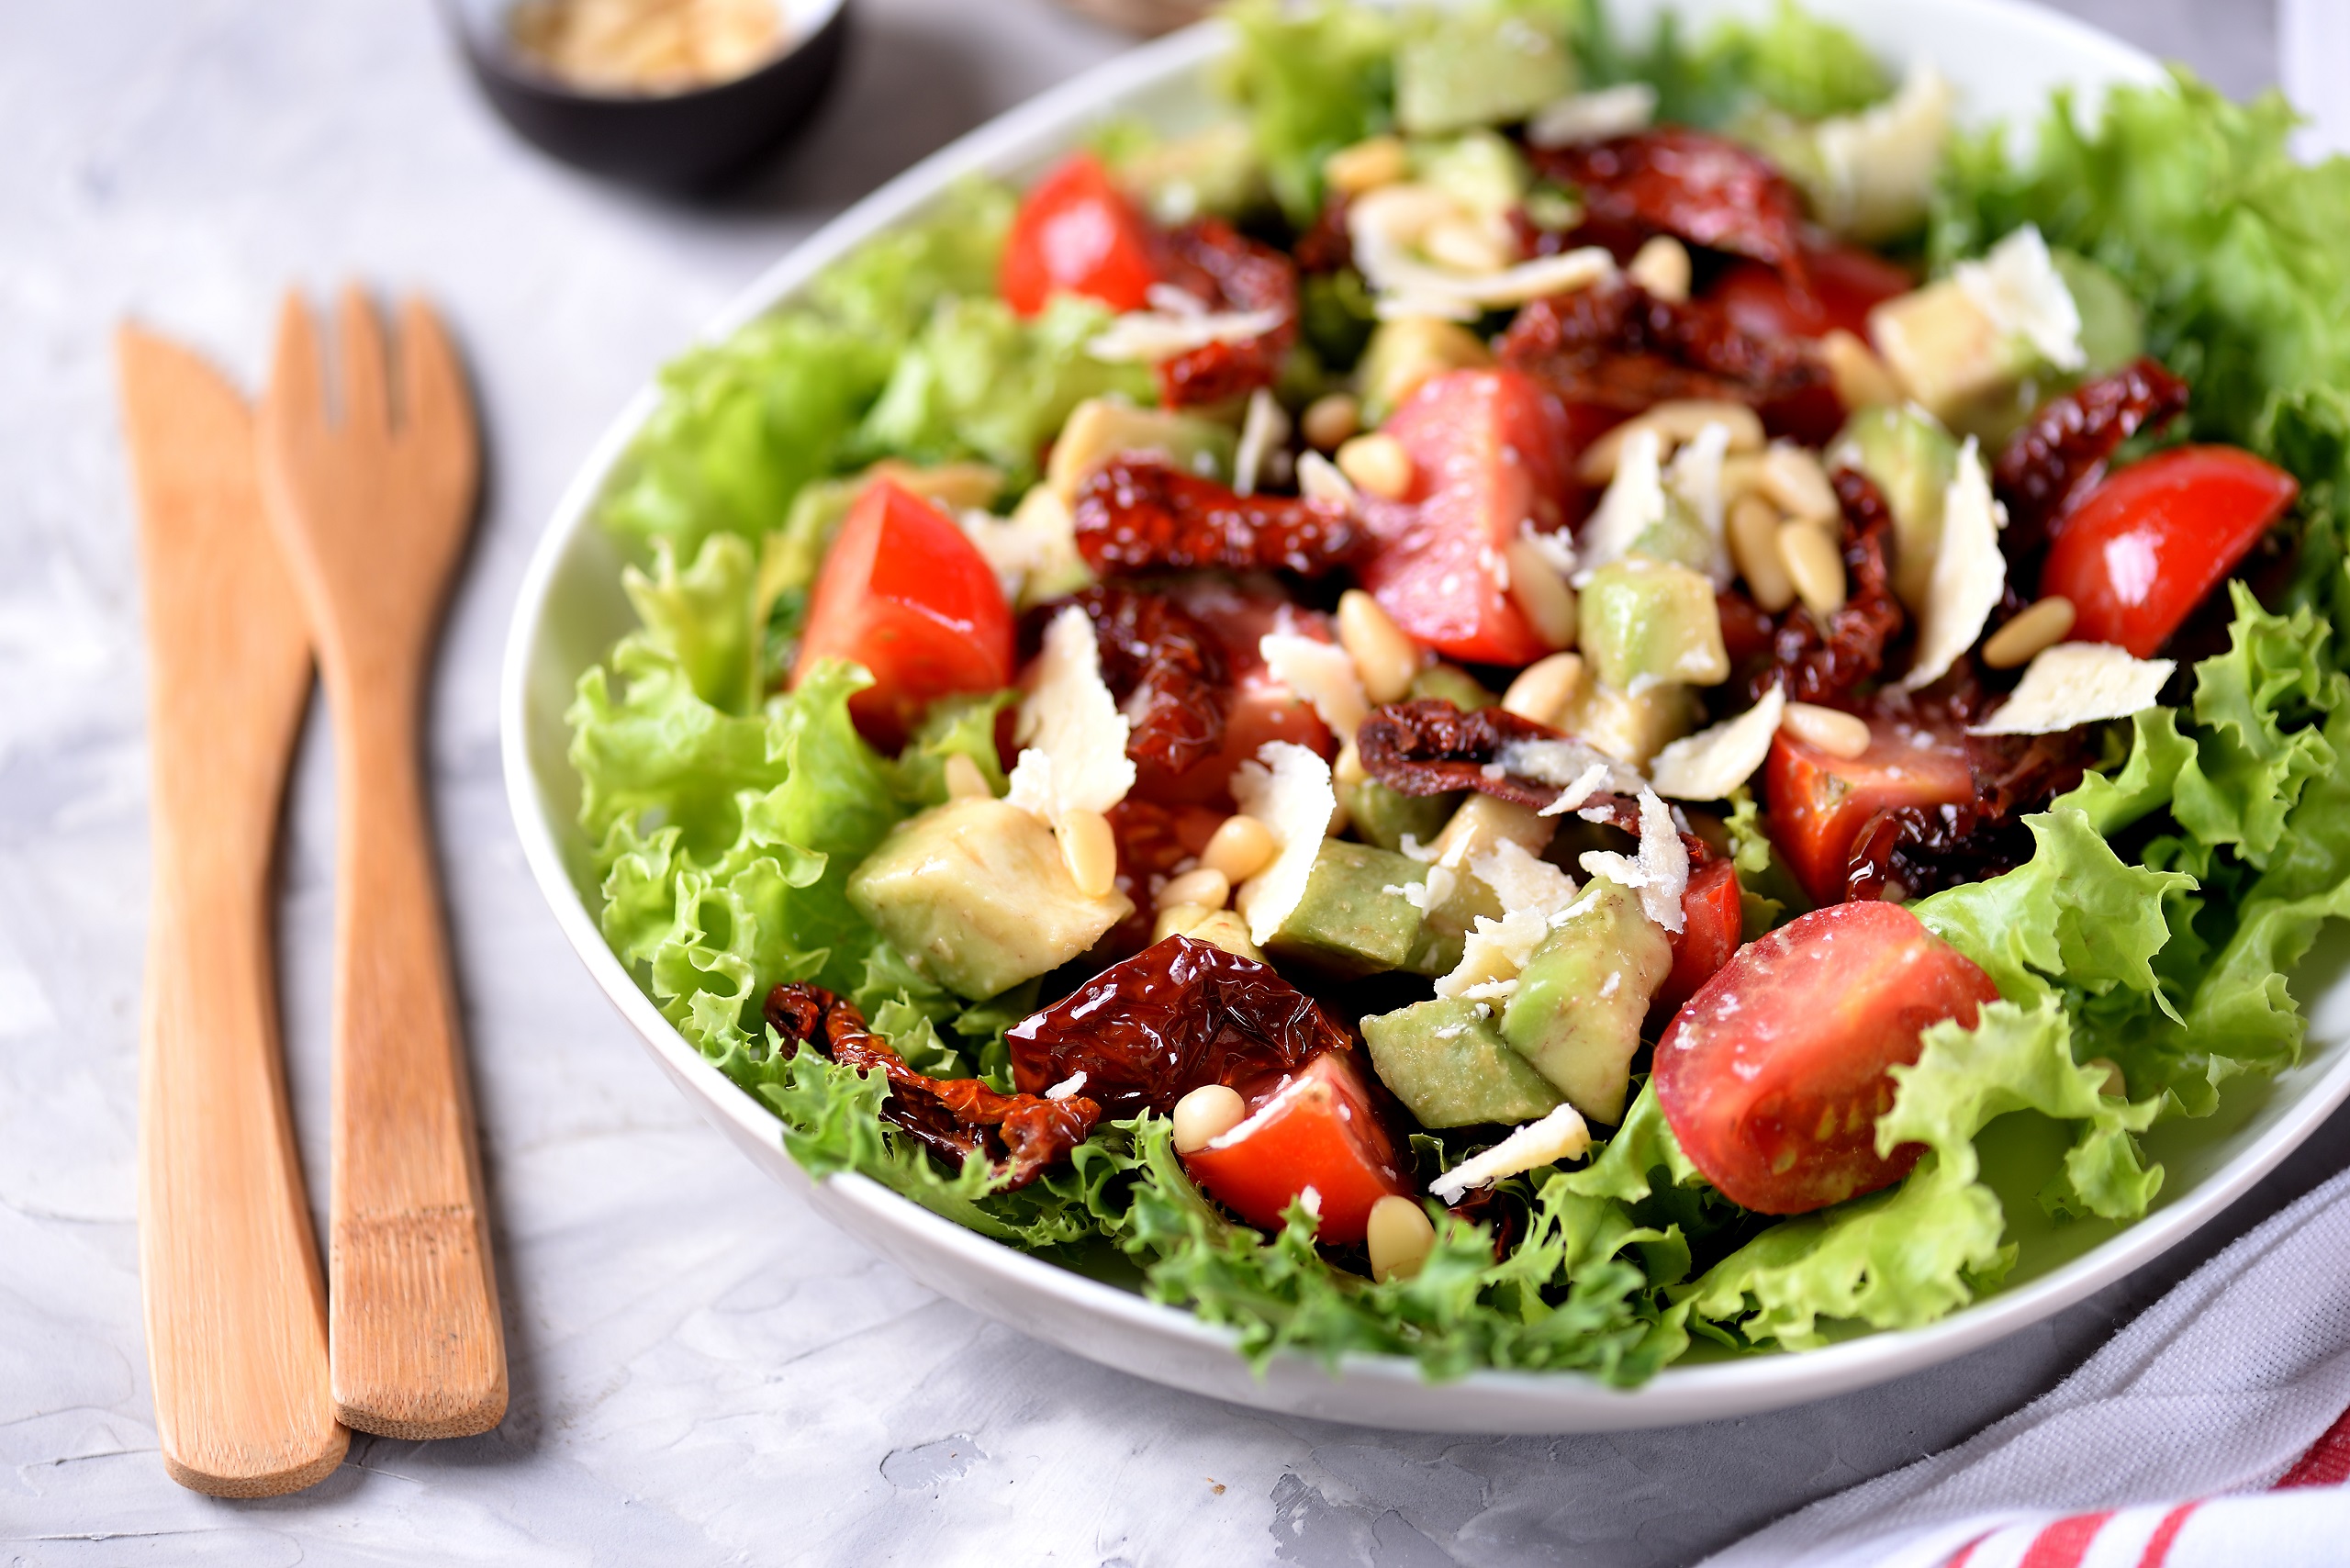 Berries, nuts, tomatoes, avocado, and mixed greens salad served in a white salad bowl on a clean, white tablecloth with a traditional wooden fork and knife at its side.